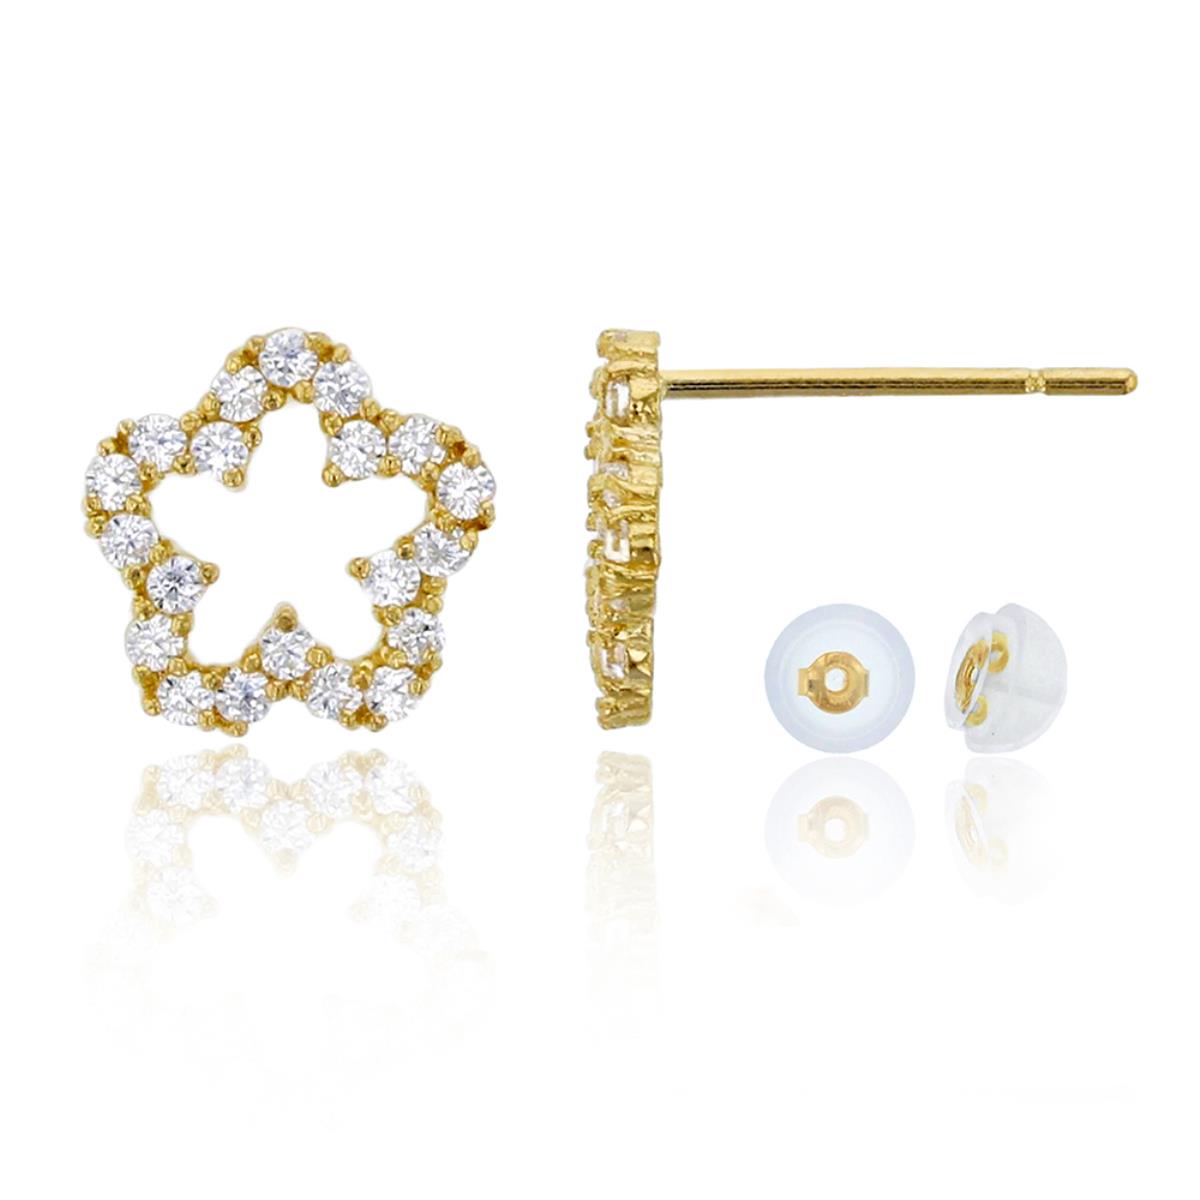 10K Yellow Gold Micropave Open Flower CZ Stud Earring with Bubble Silicone Backs